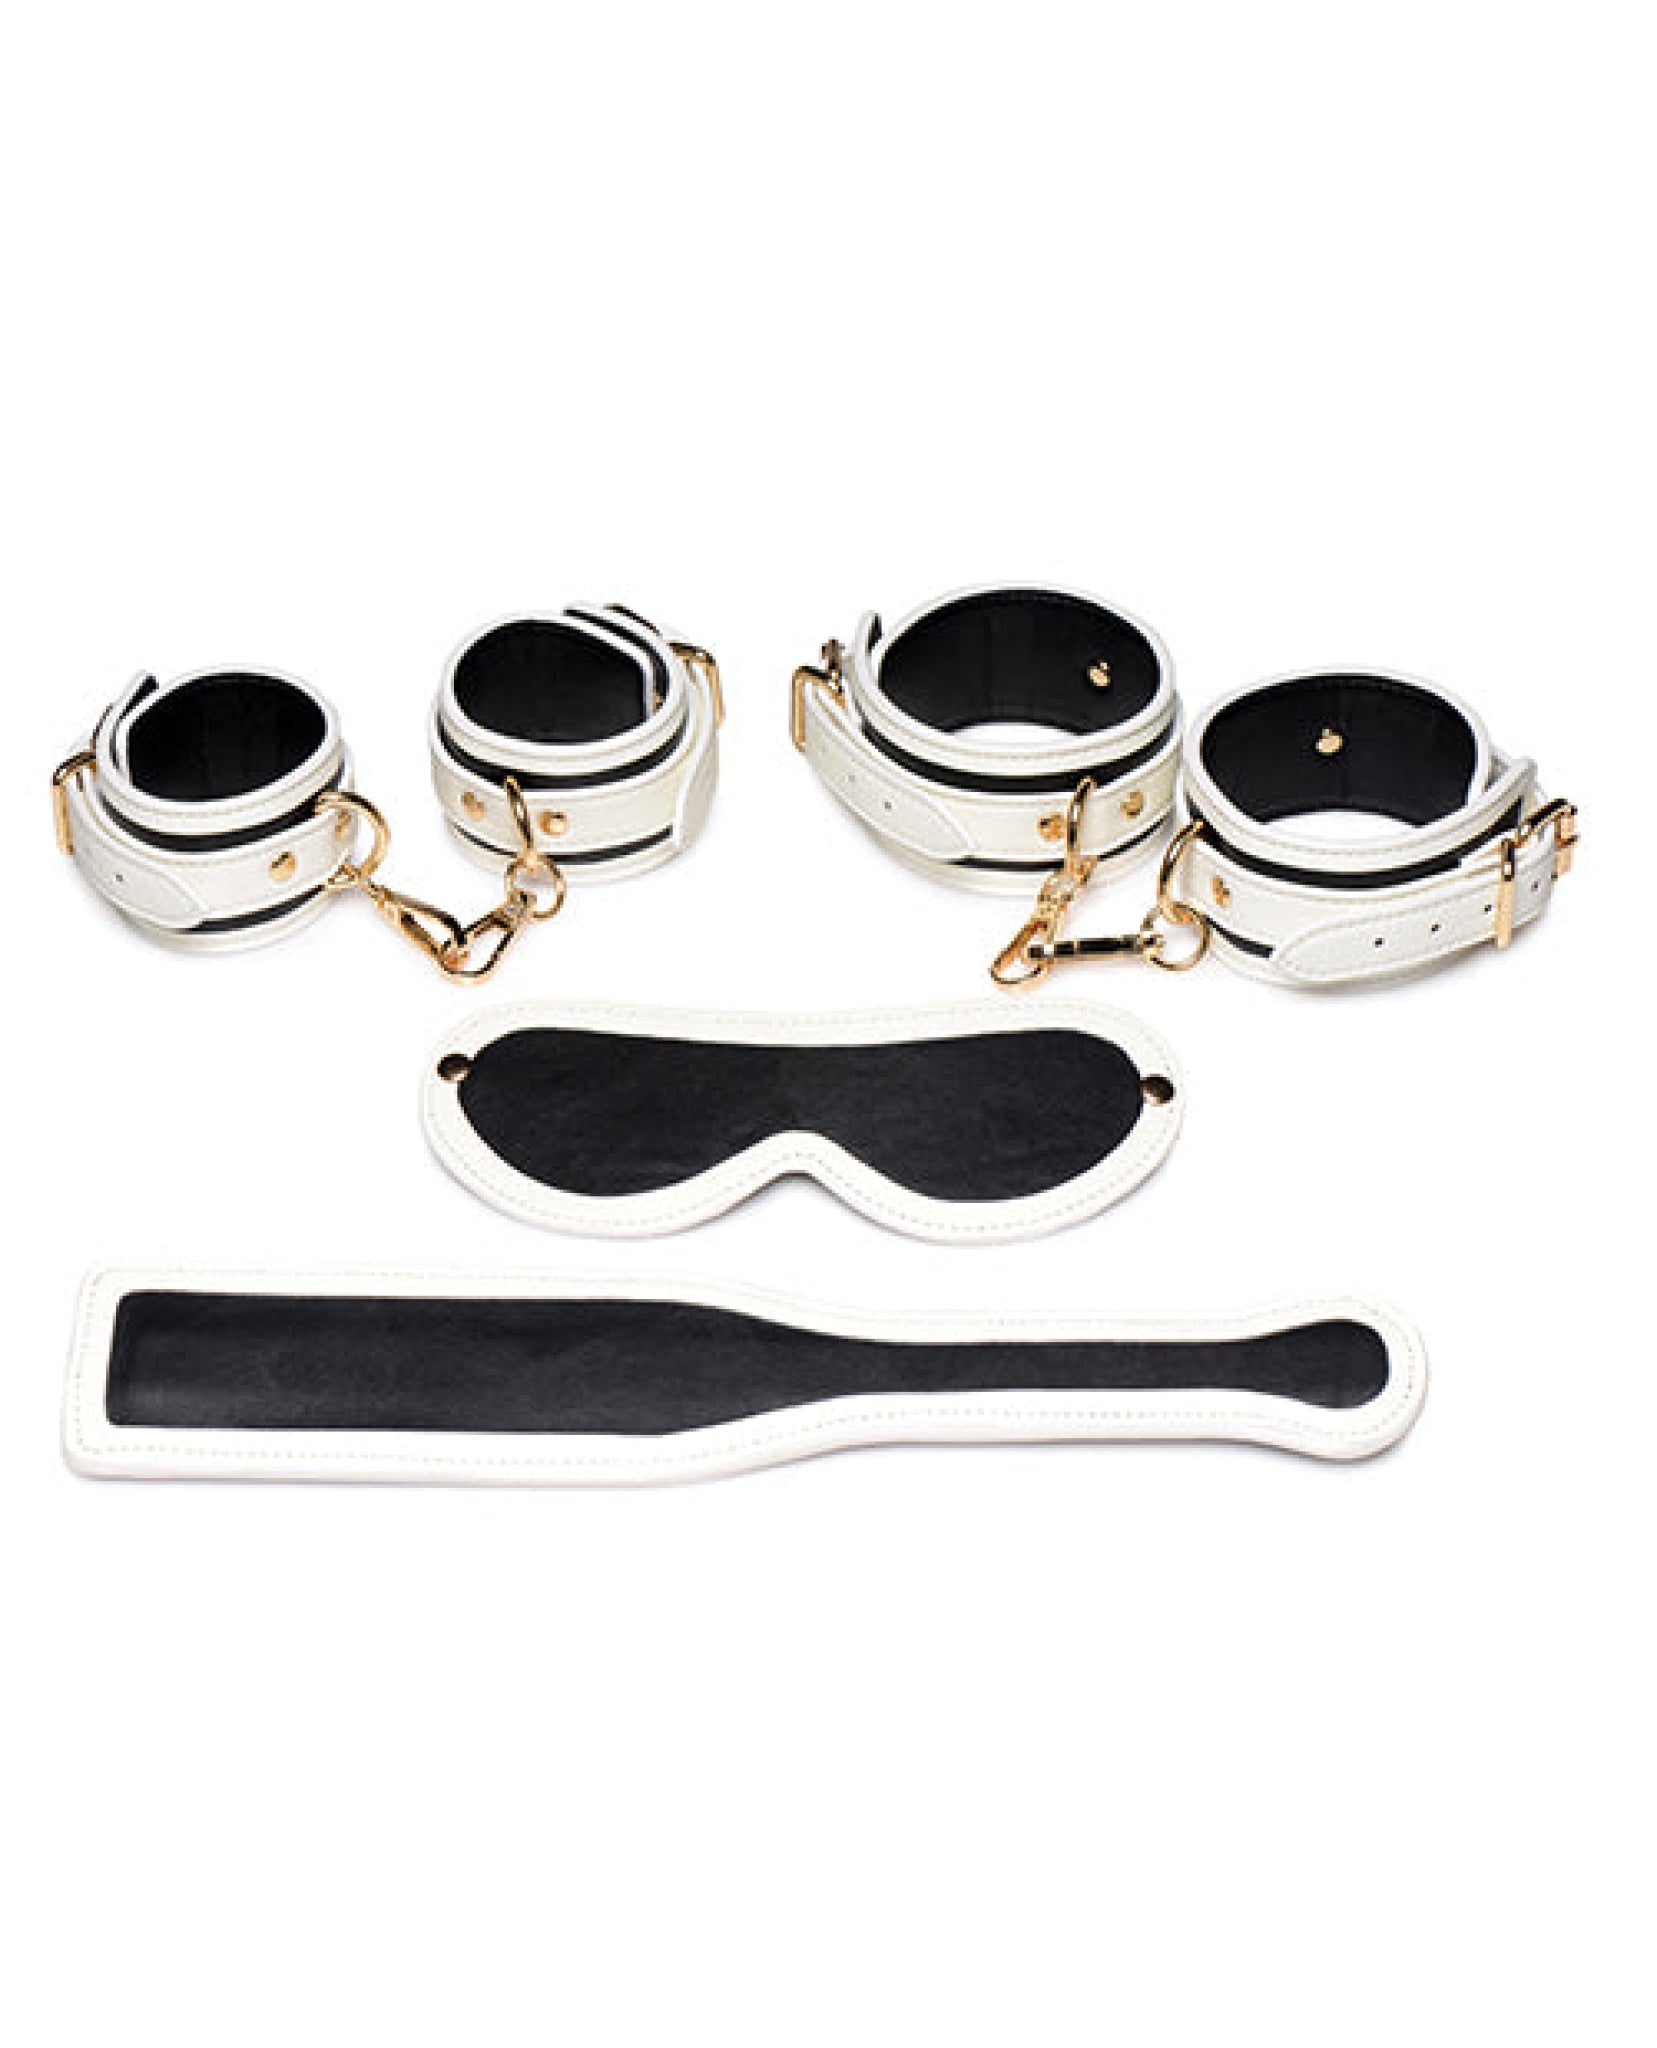 Master Series Kink In The Dark Glowing Cuffs & Blindfold & Paddle Set Master Series